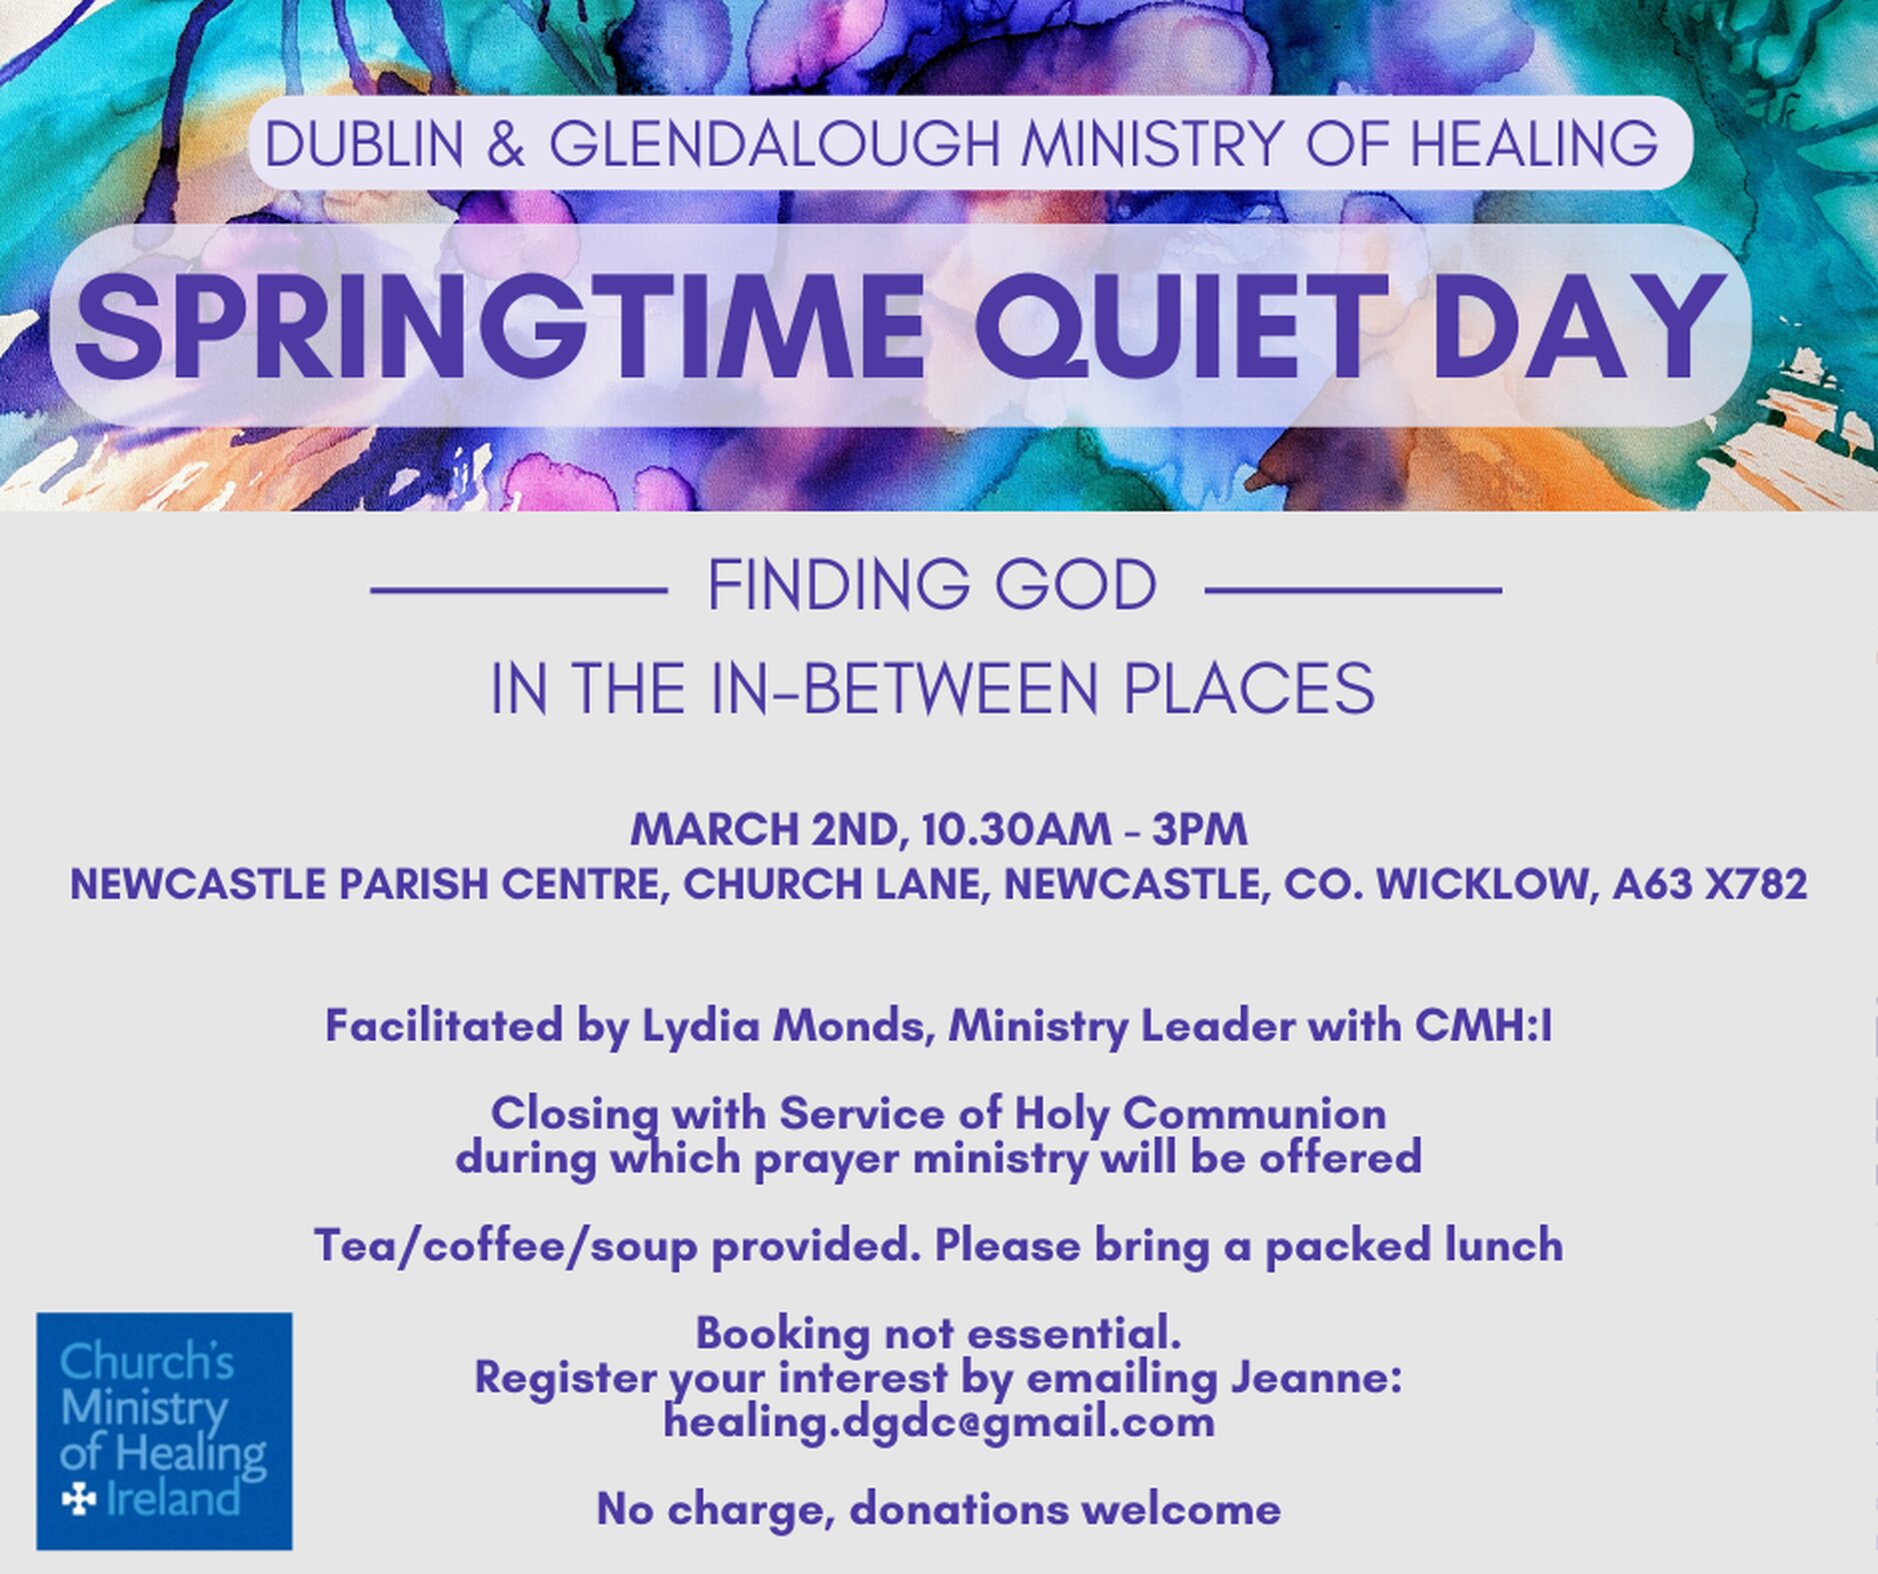 CMH D&G Springtime Quiet Day - ‘Finding God in the in–between places’